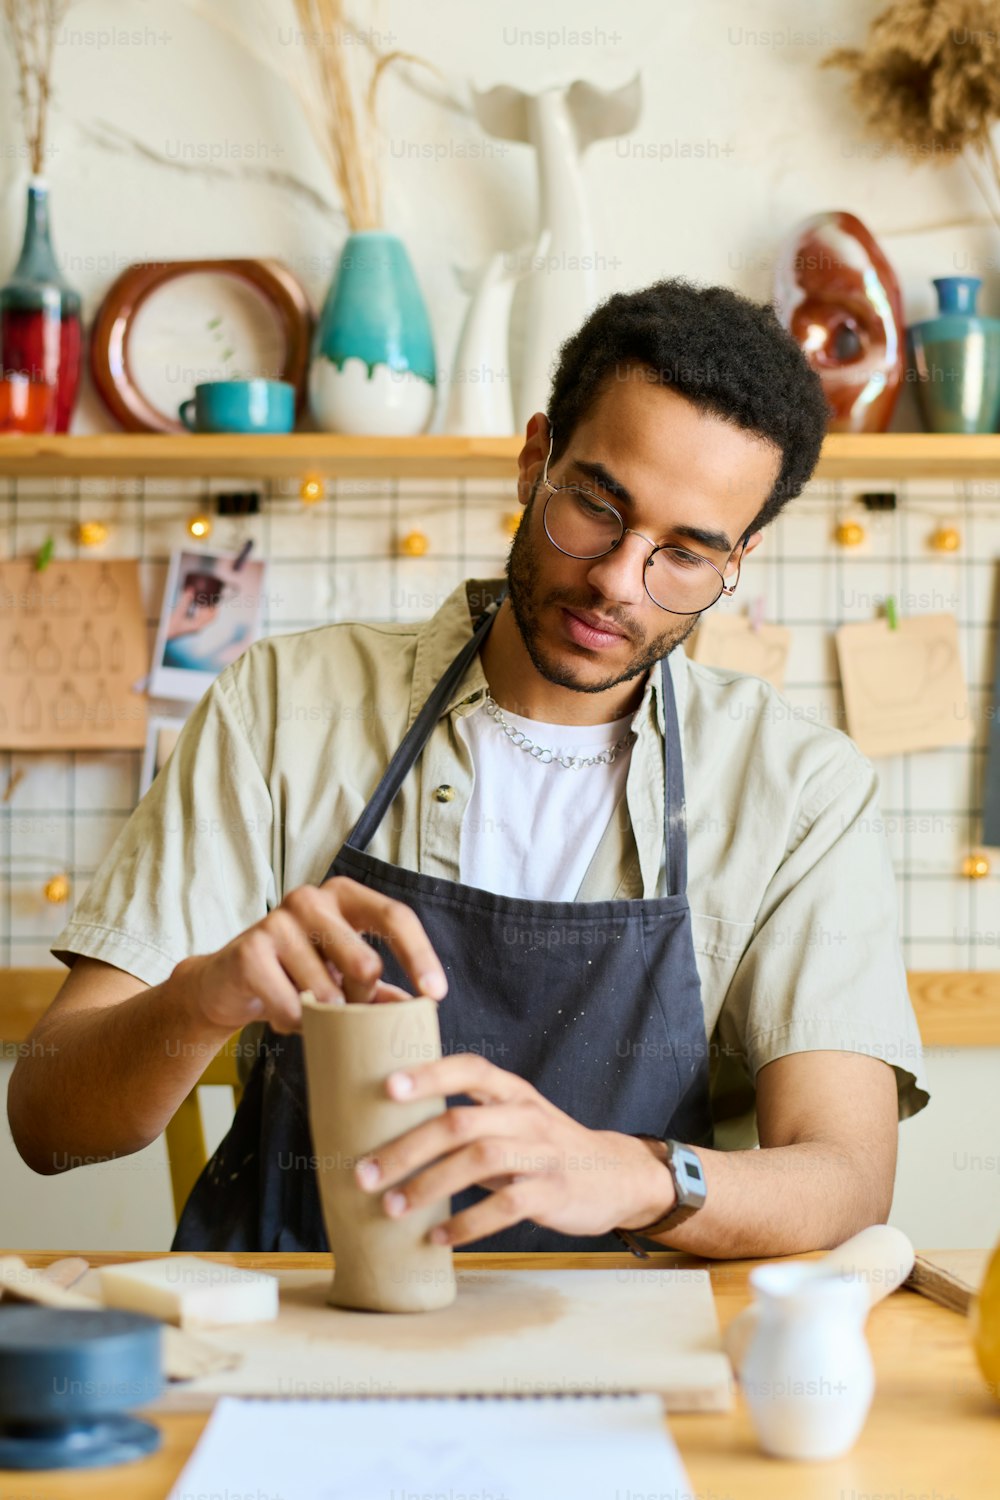 Creative male pitcher making new clay vase or jug while sitting by table with supplies for creatibe earthenware in studio or workshop